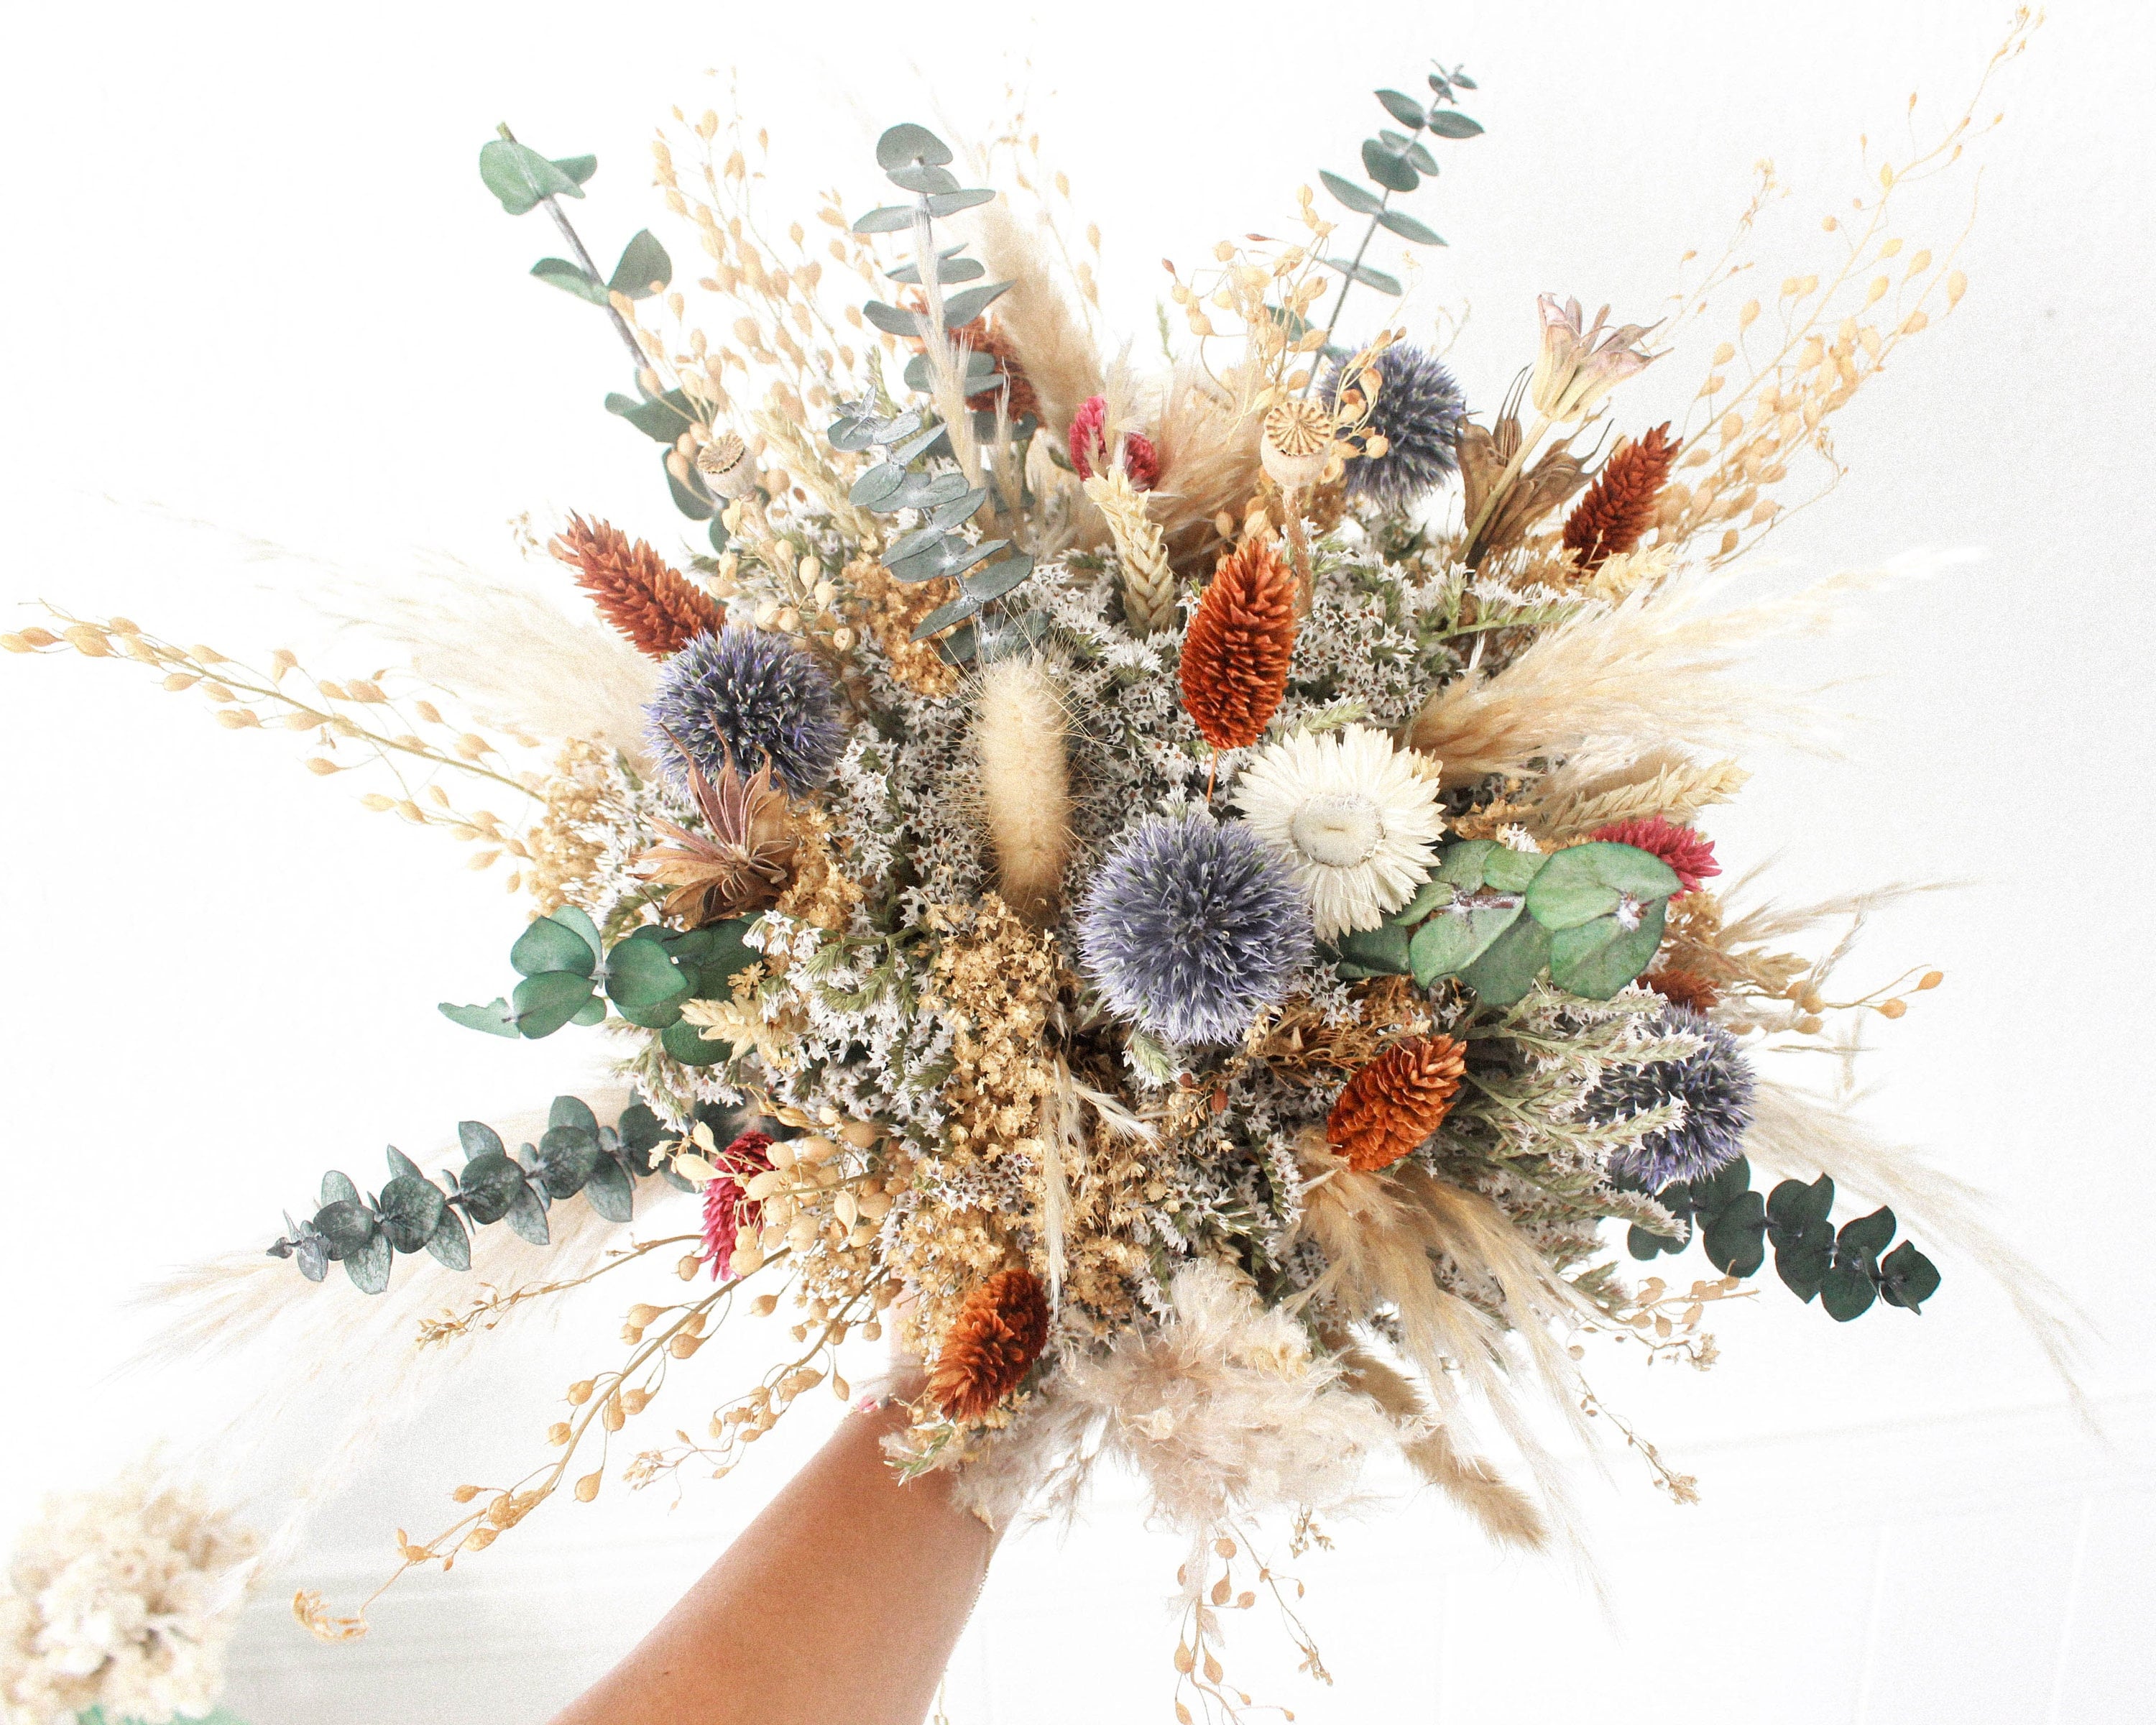 Dried Flower Bouquet, Navy and Yellow Dried Flowers, Dried Flower  Arrangement, Grey Pampas, Bunny Tails